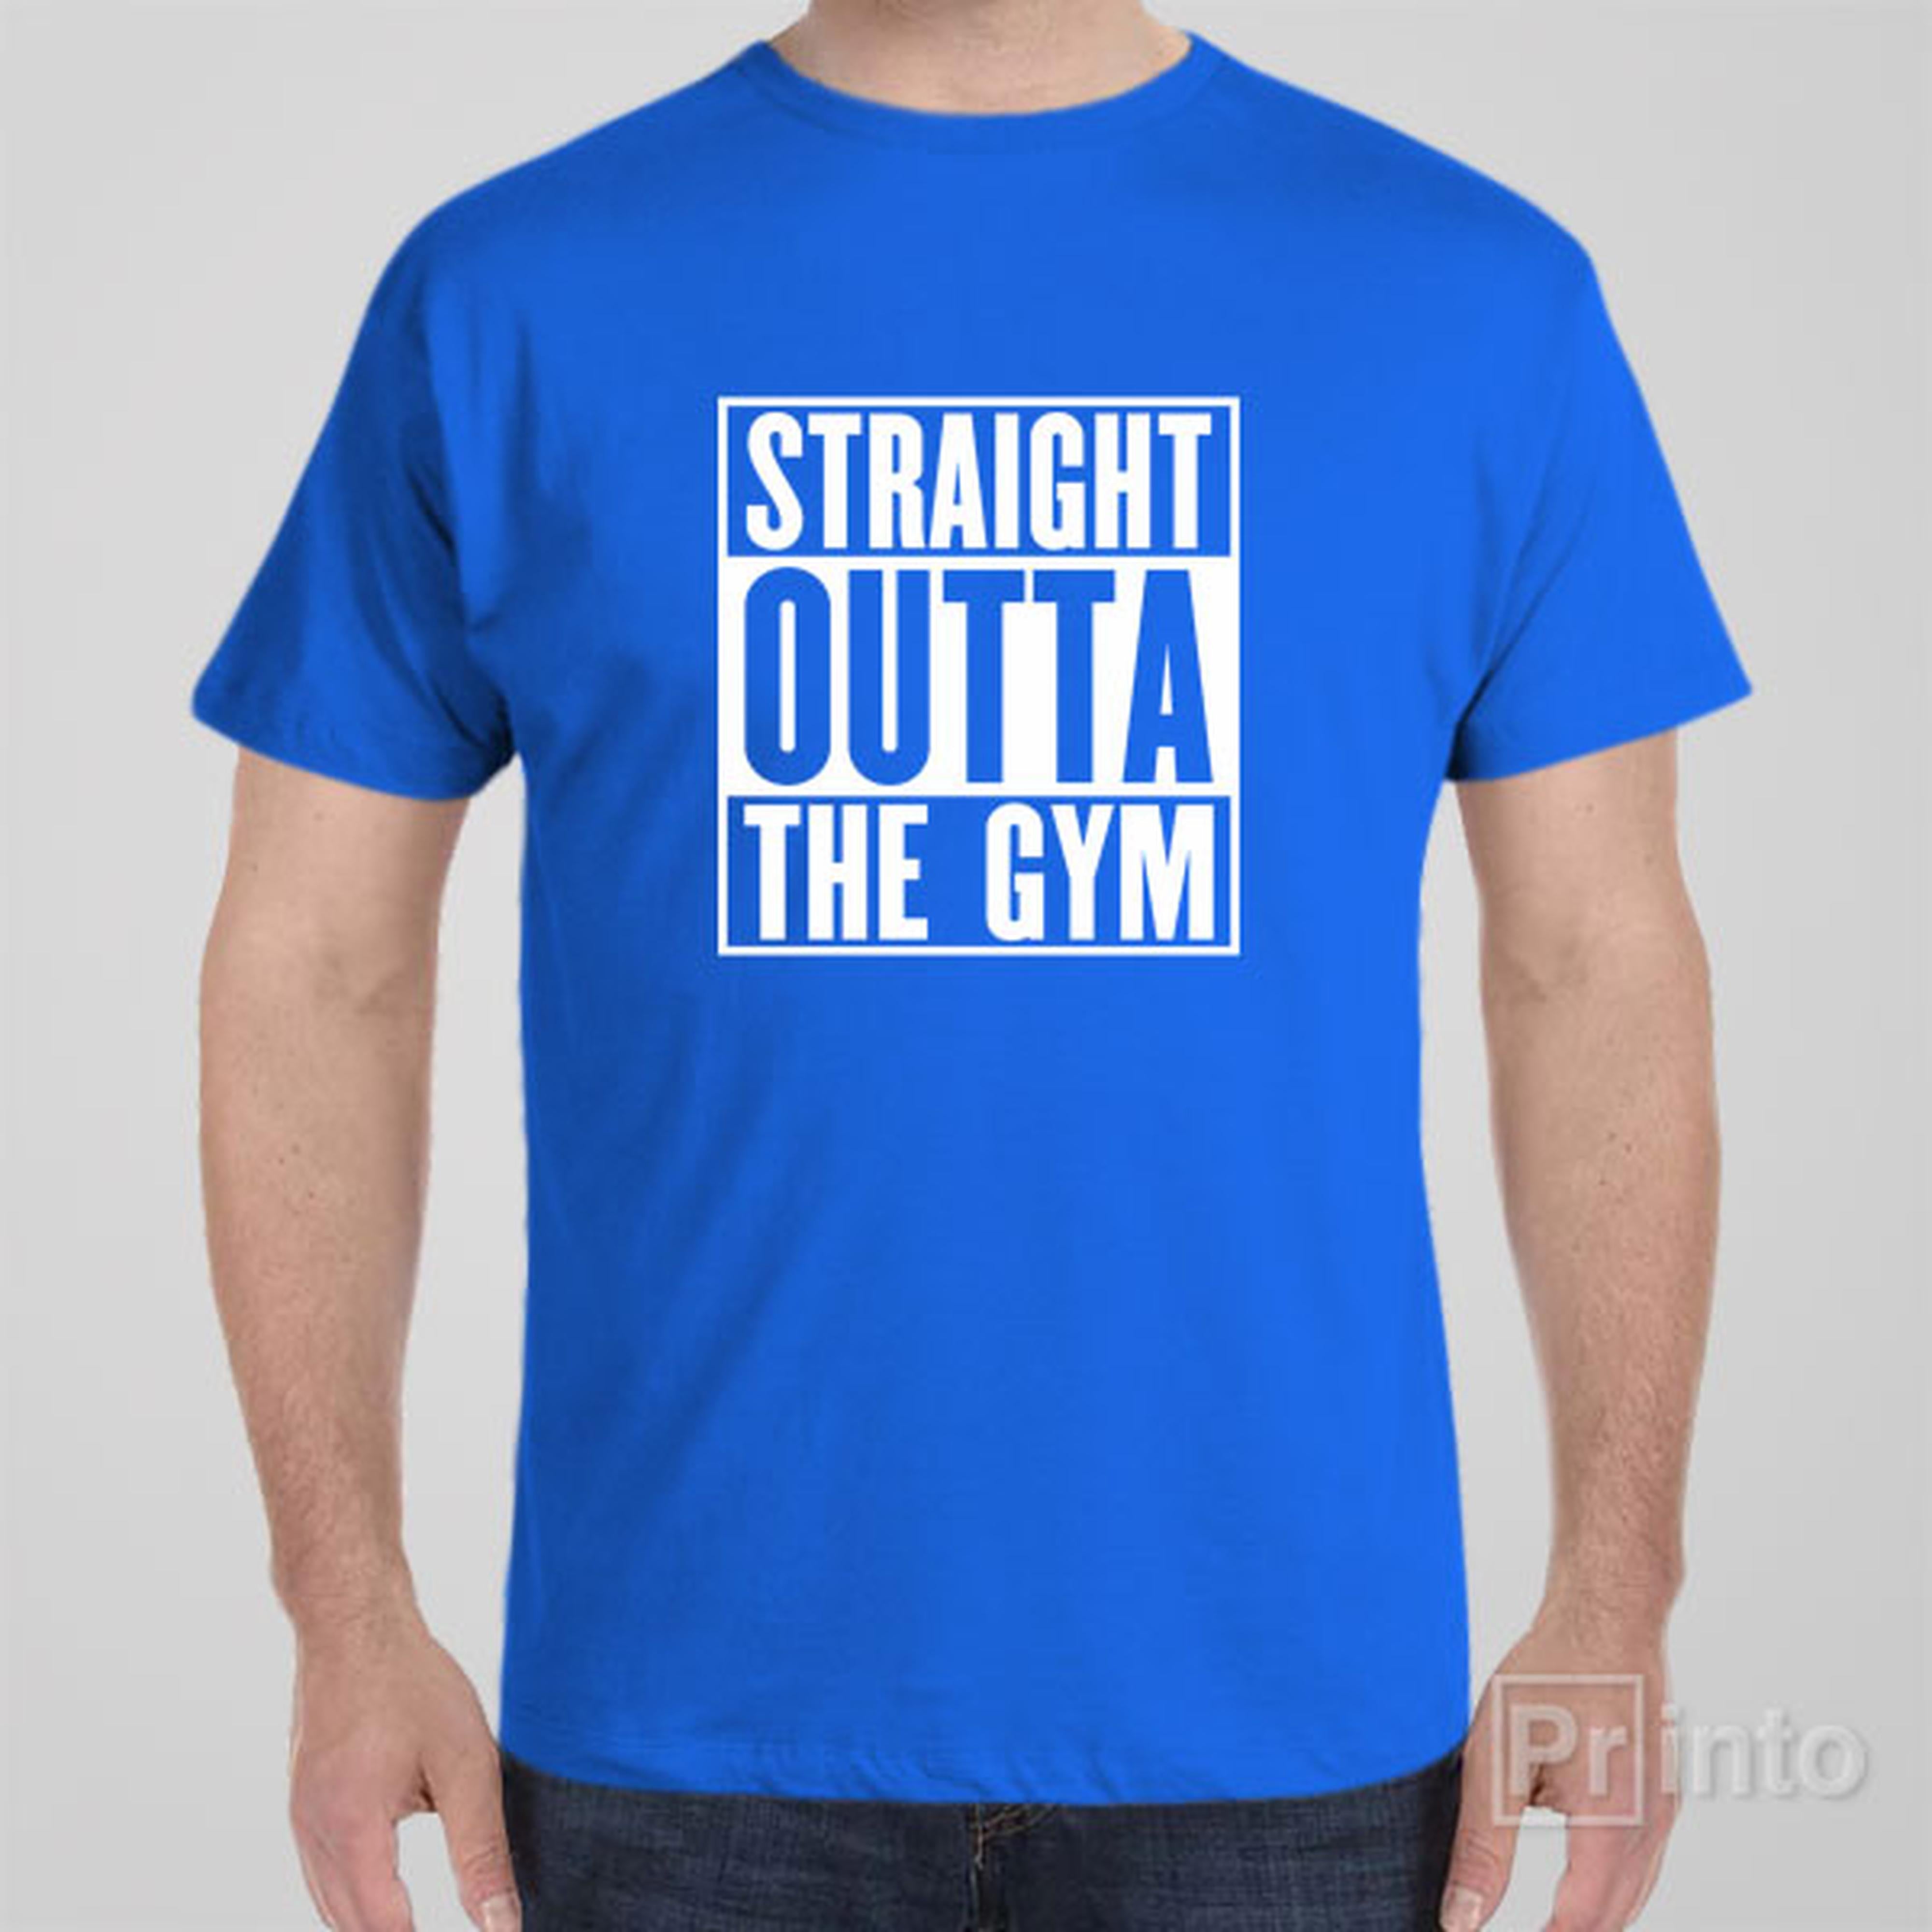 straight-outta-the-gym-t-shirt